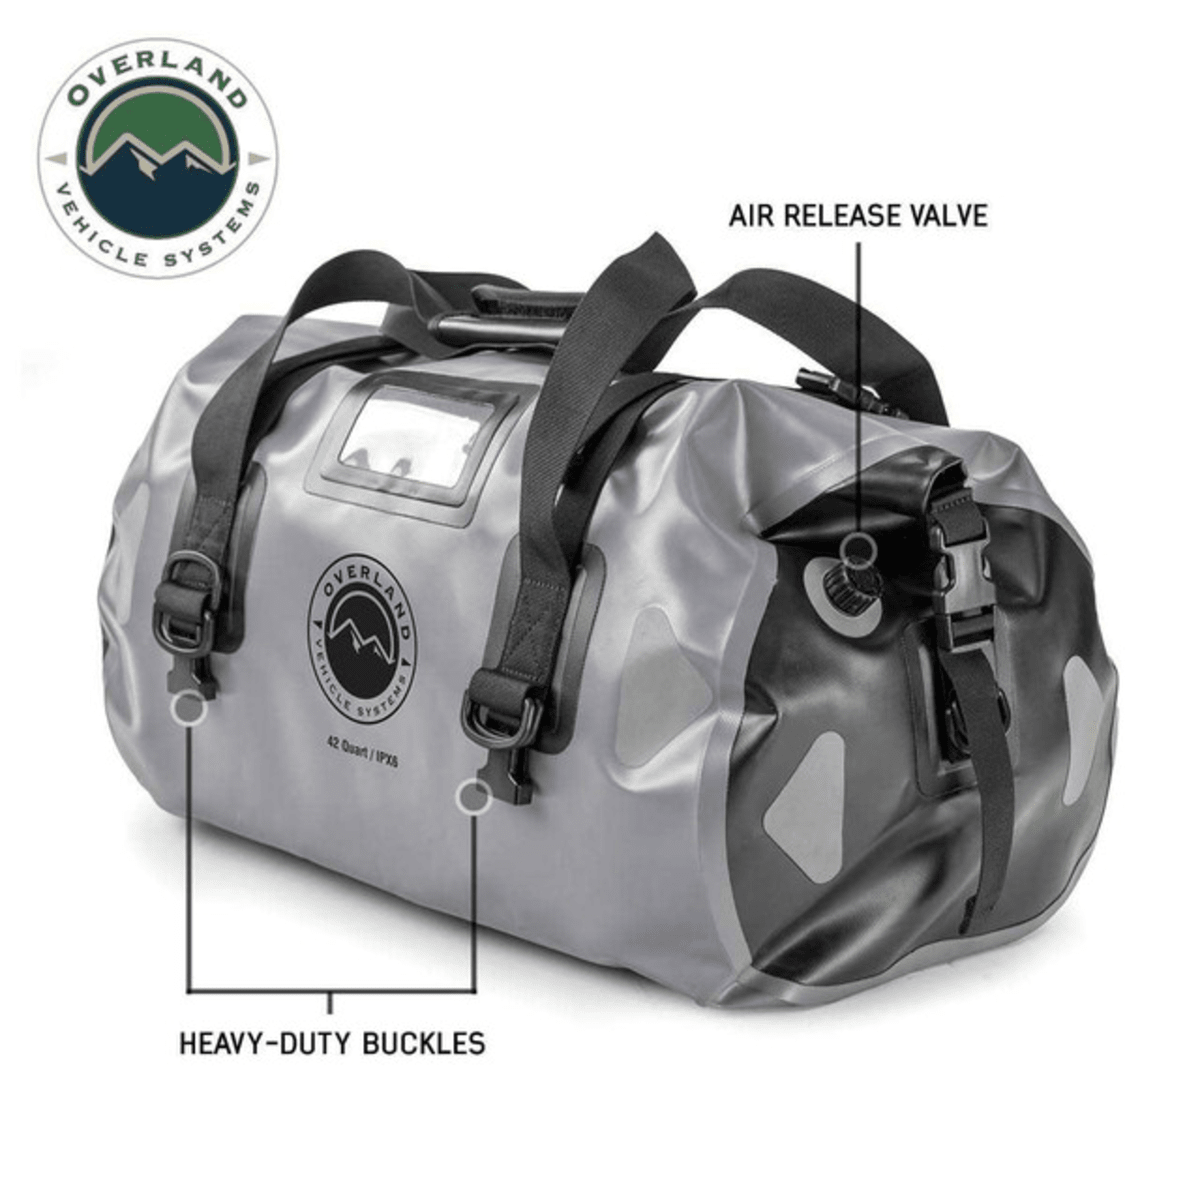 Overland Vehicle Systems Portable Camp Shower Storage Bag shower bag Overland Vehicle Systems   